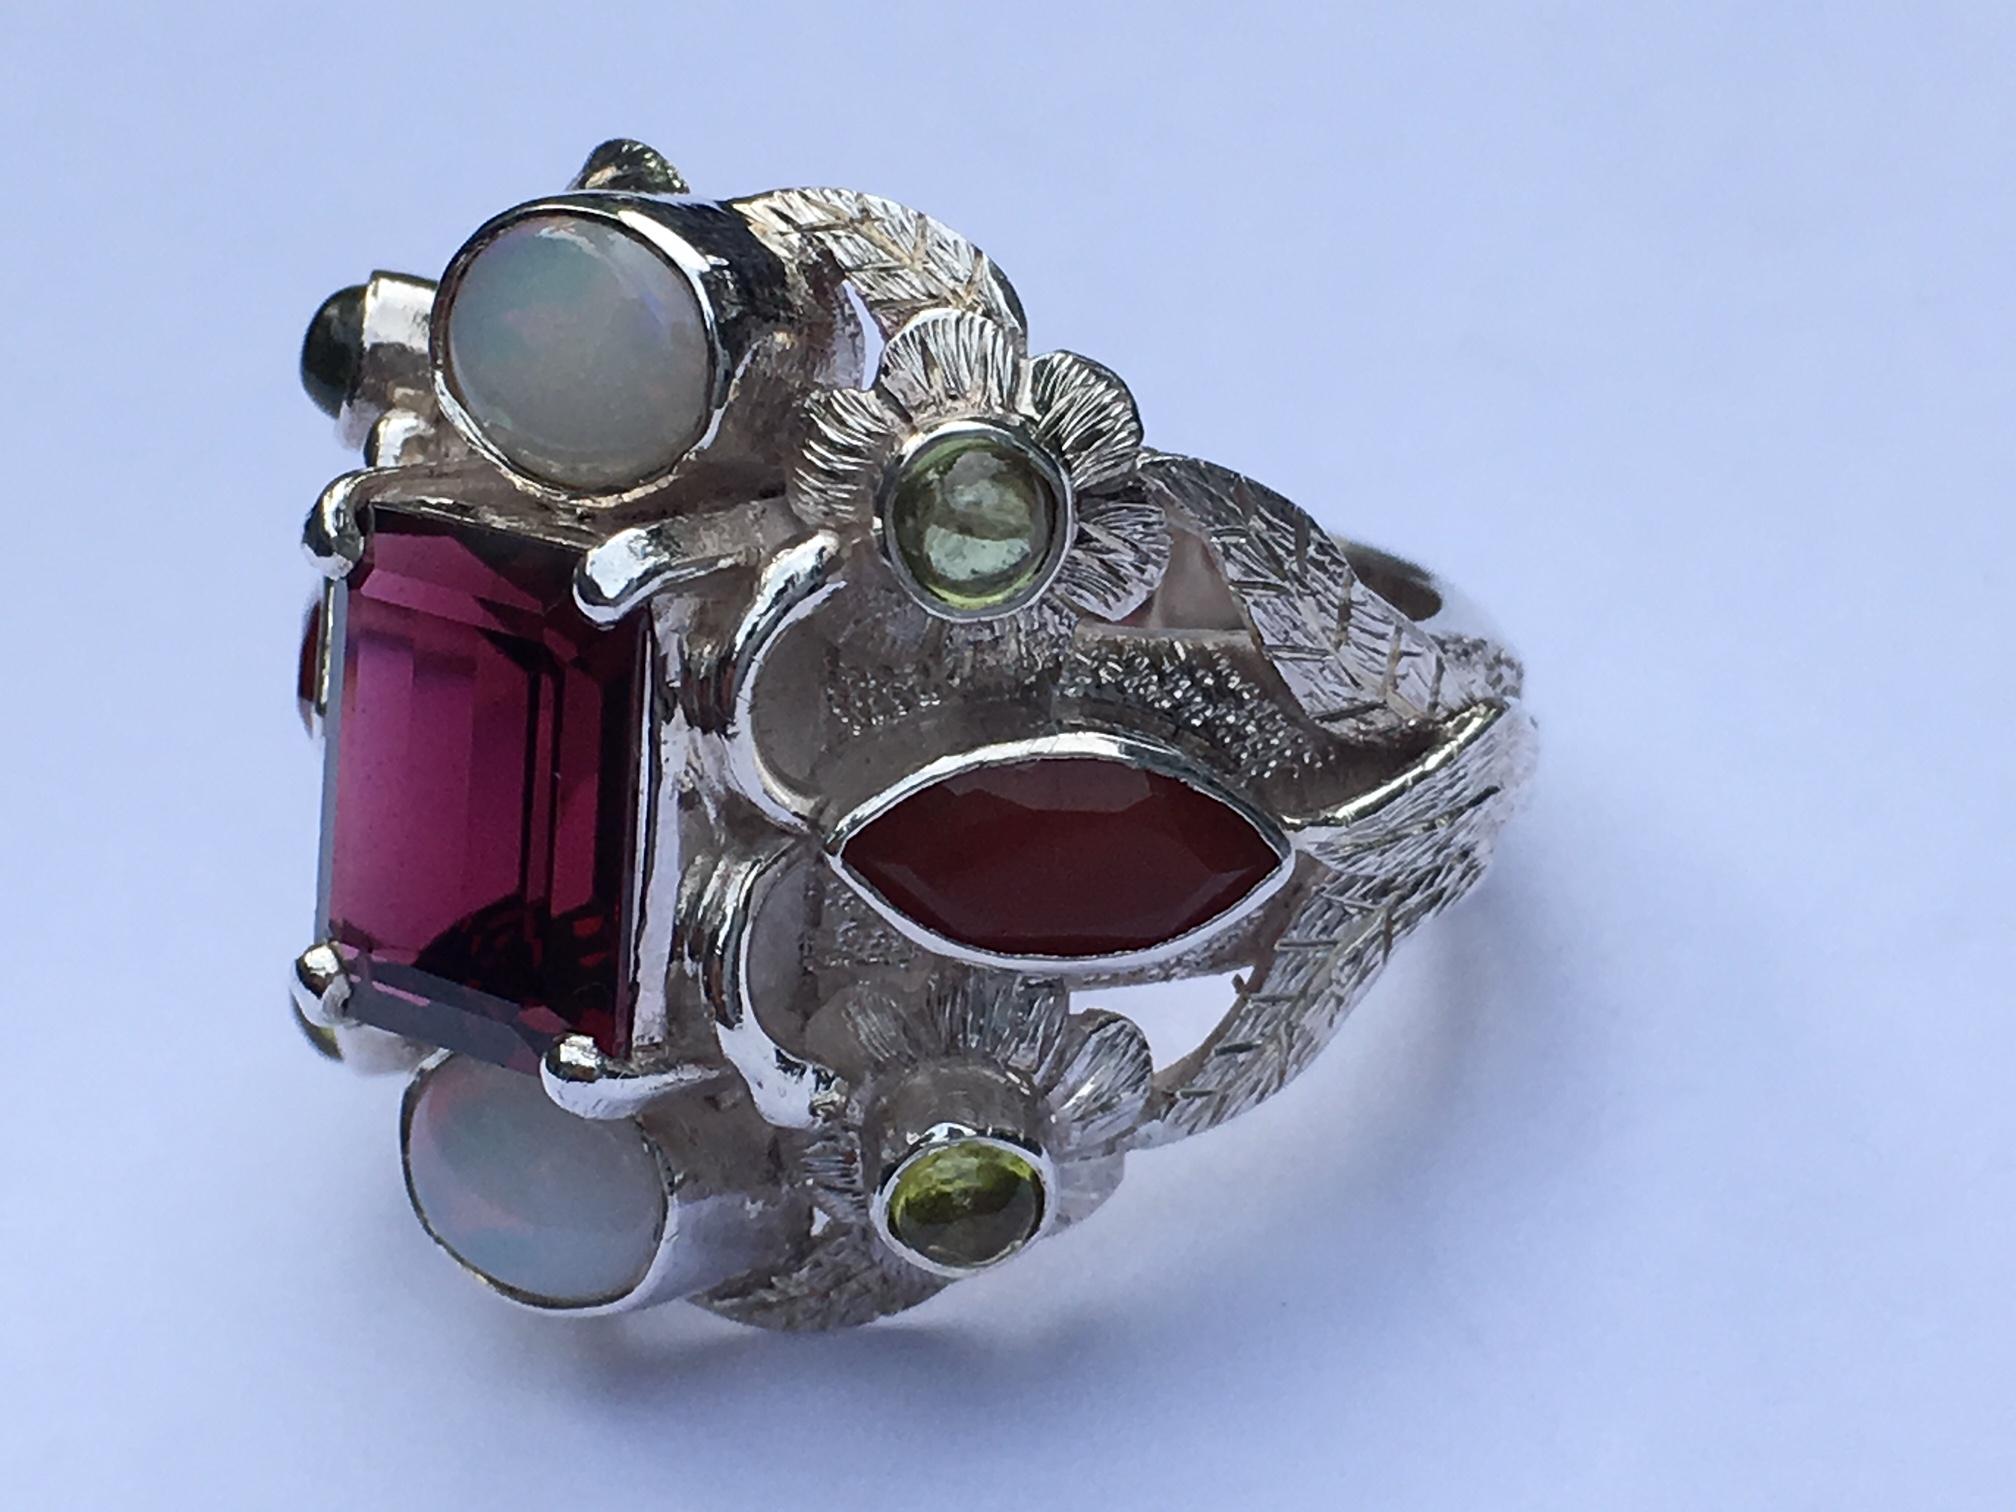 Garnet, Opal, Carnelian and Peridot Cocktail Ring This item is on sale for Black 2